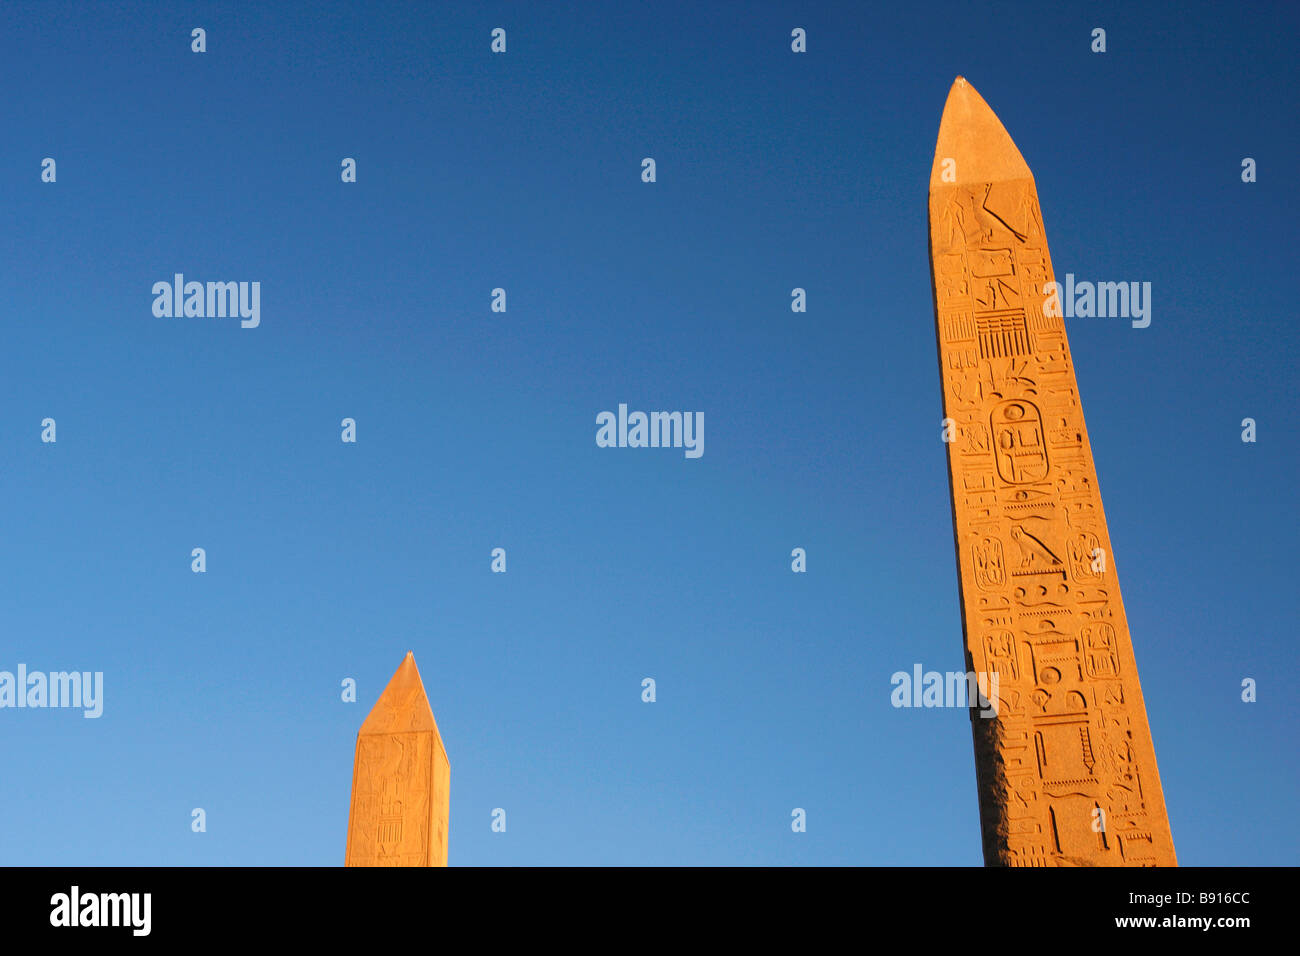 Obelisks of Queen Hatshepsut and Pharaoh Tuthmosis I carved with hieroglyphics against blue sky, Karnak Temple, Luxor, Egypt Stock Photo